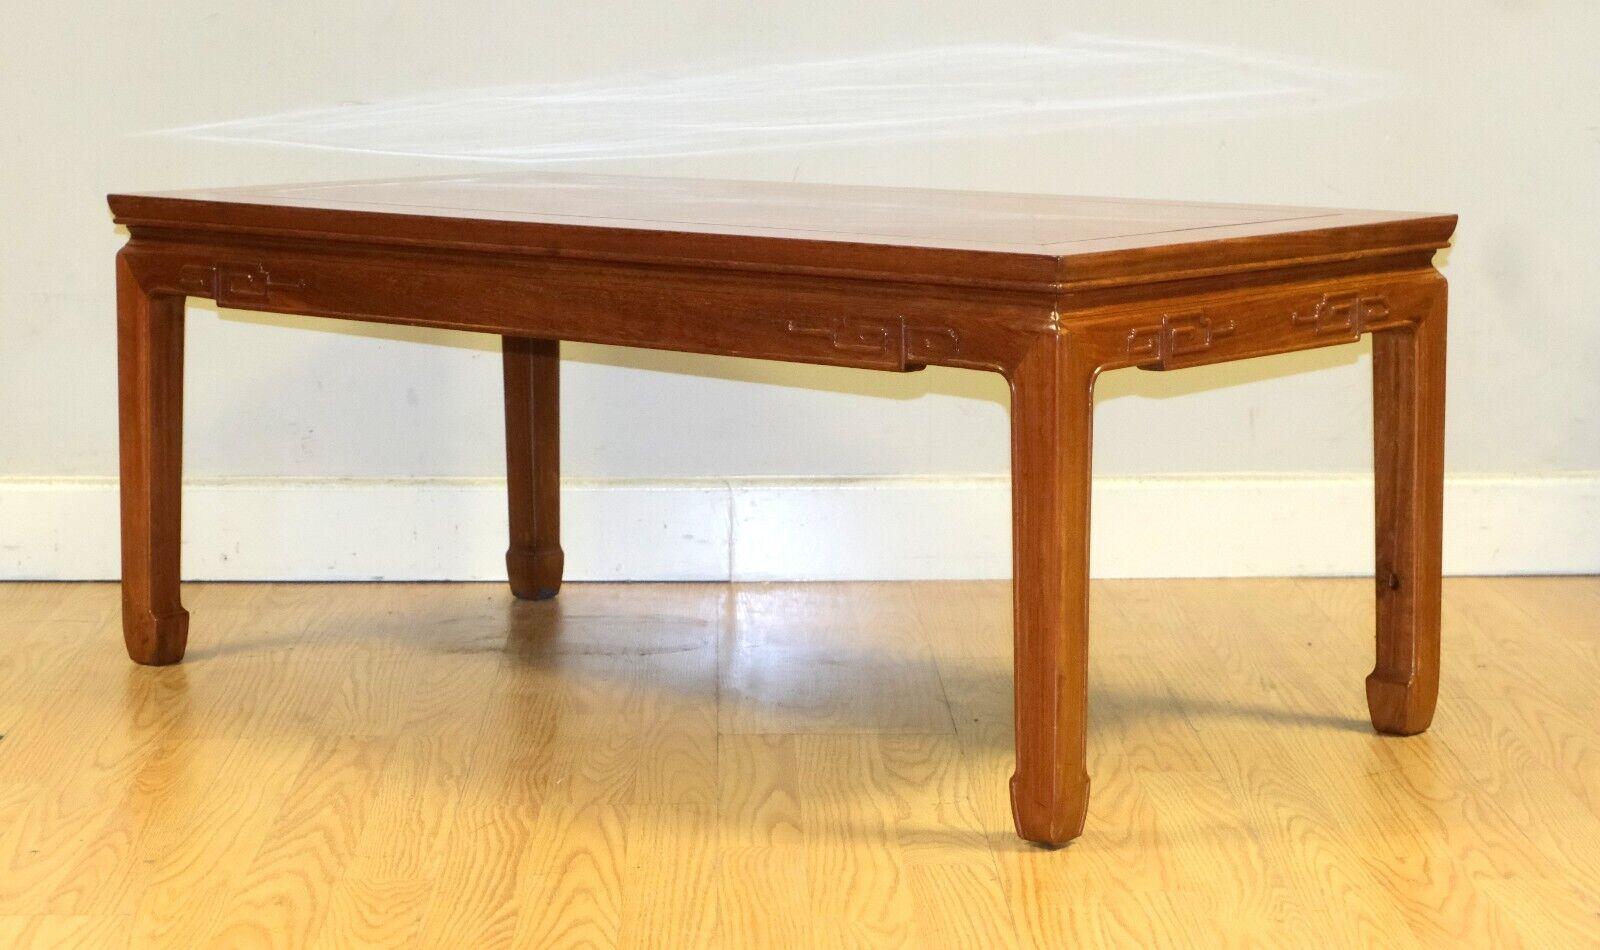 Chippendale chinois LOVELY VINTAGE SOLID HARDWOOD CHiNESE COFFEE TABLE SUR HOOF FEET en vente